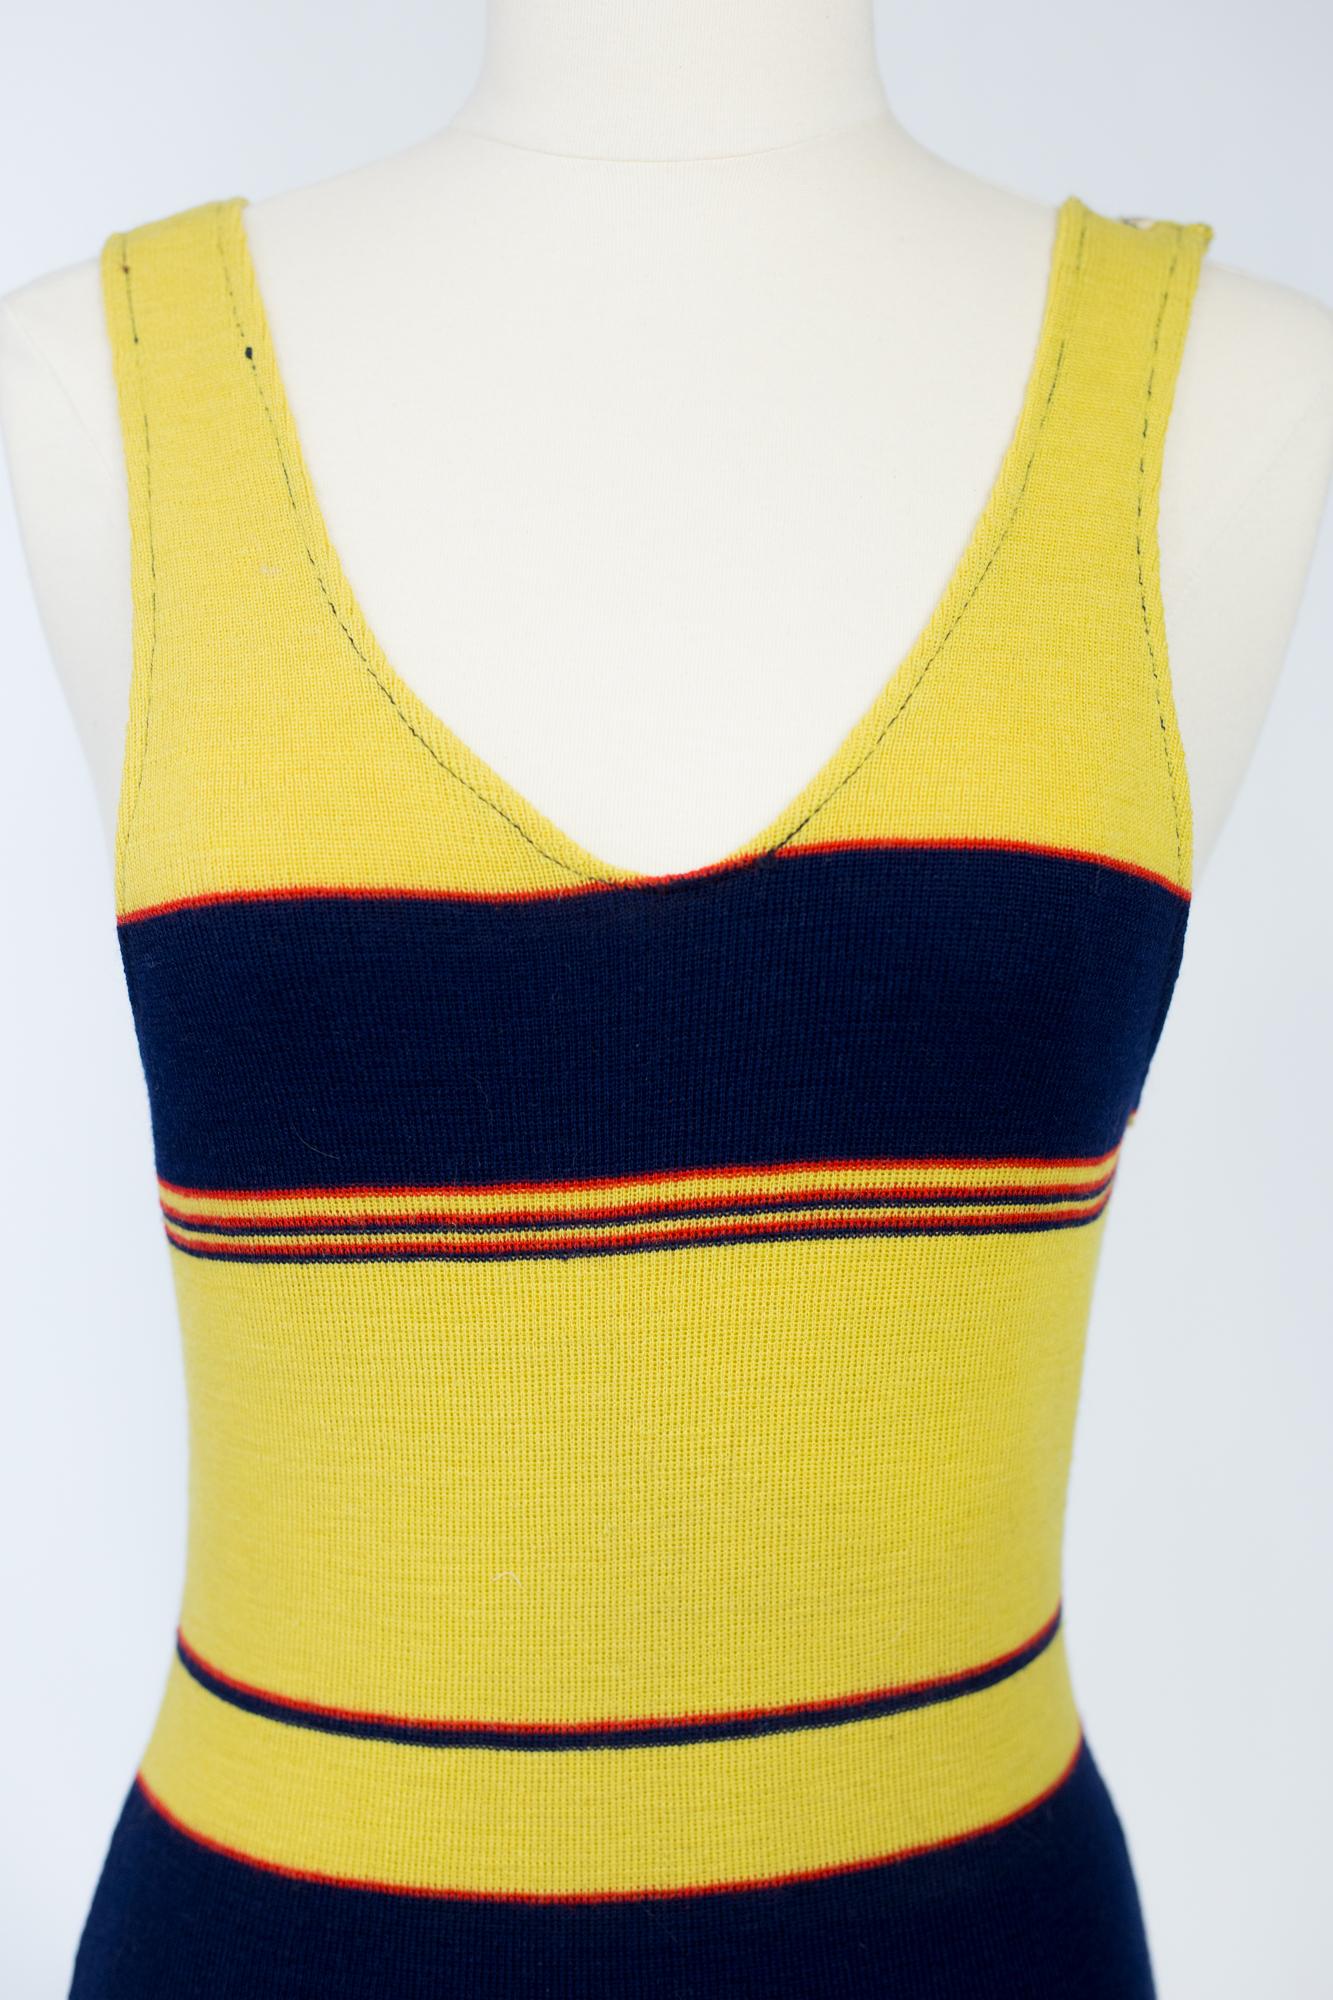 Wool knit Art Deco bathing suit in Chanel or Patou Style- France Circa 1925 For Sale 5